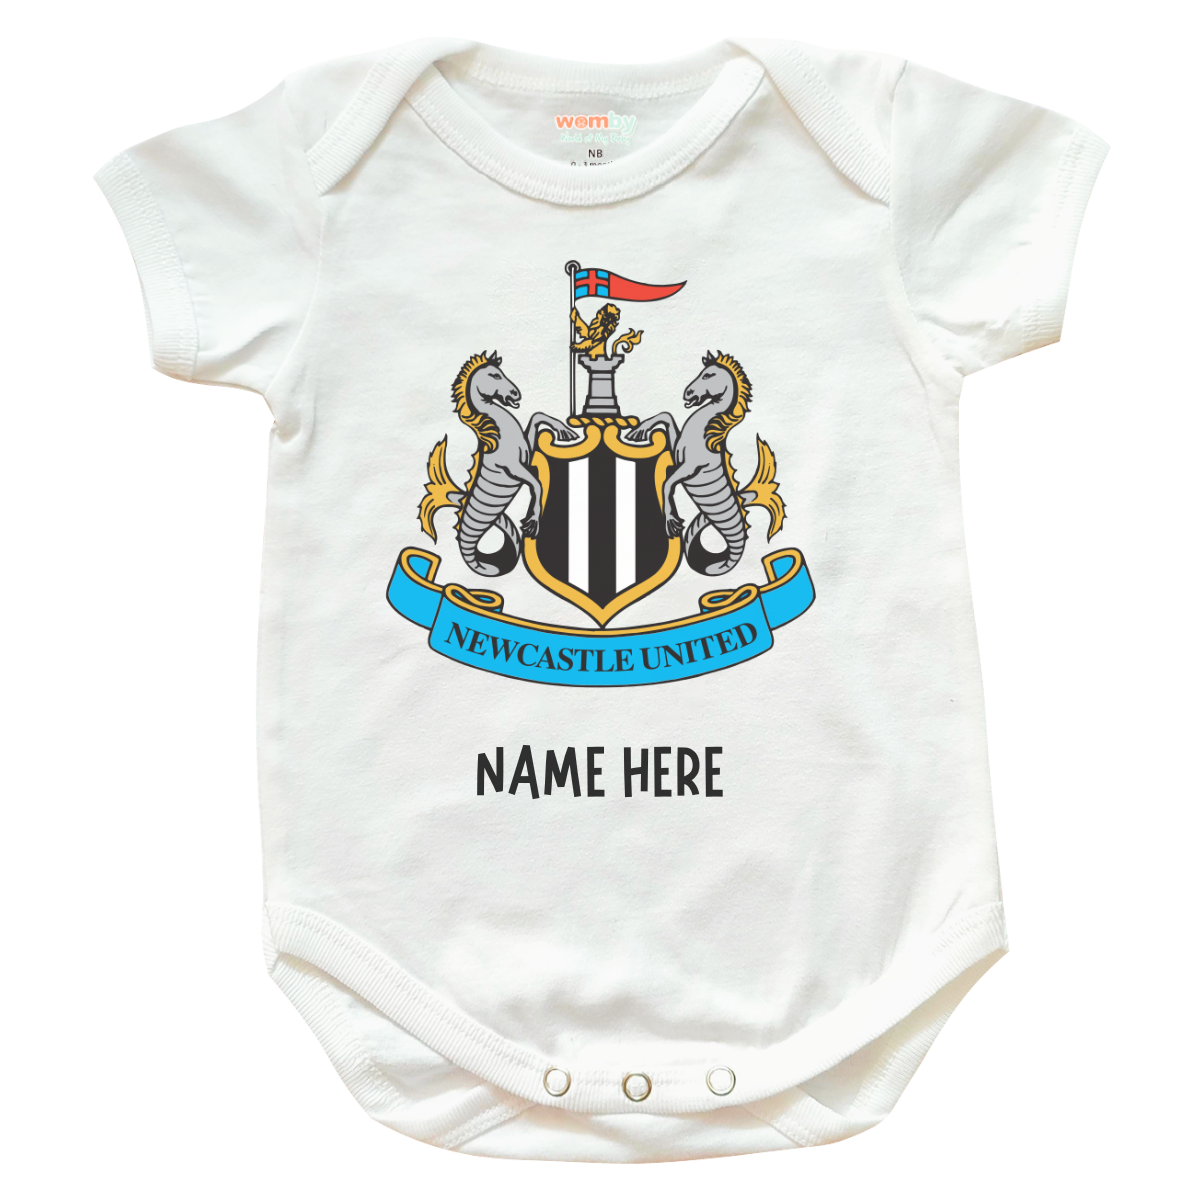 Newcastle United Football Team Baby Rompers - White